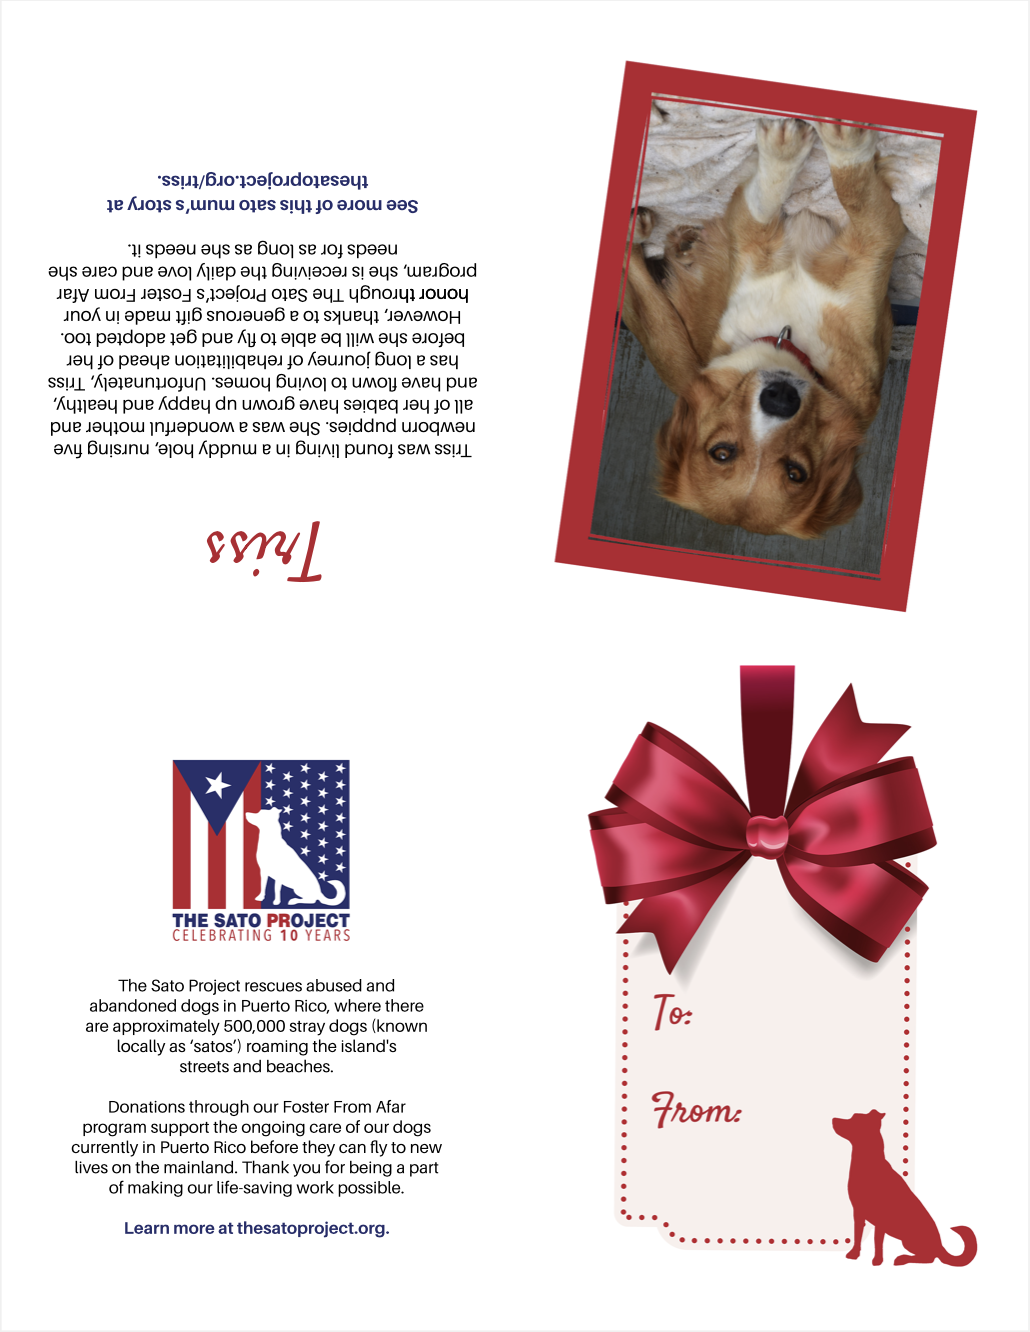 You'll also receive this printable card to give your donation as a gift!